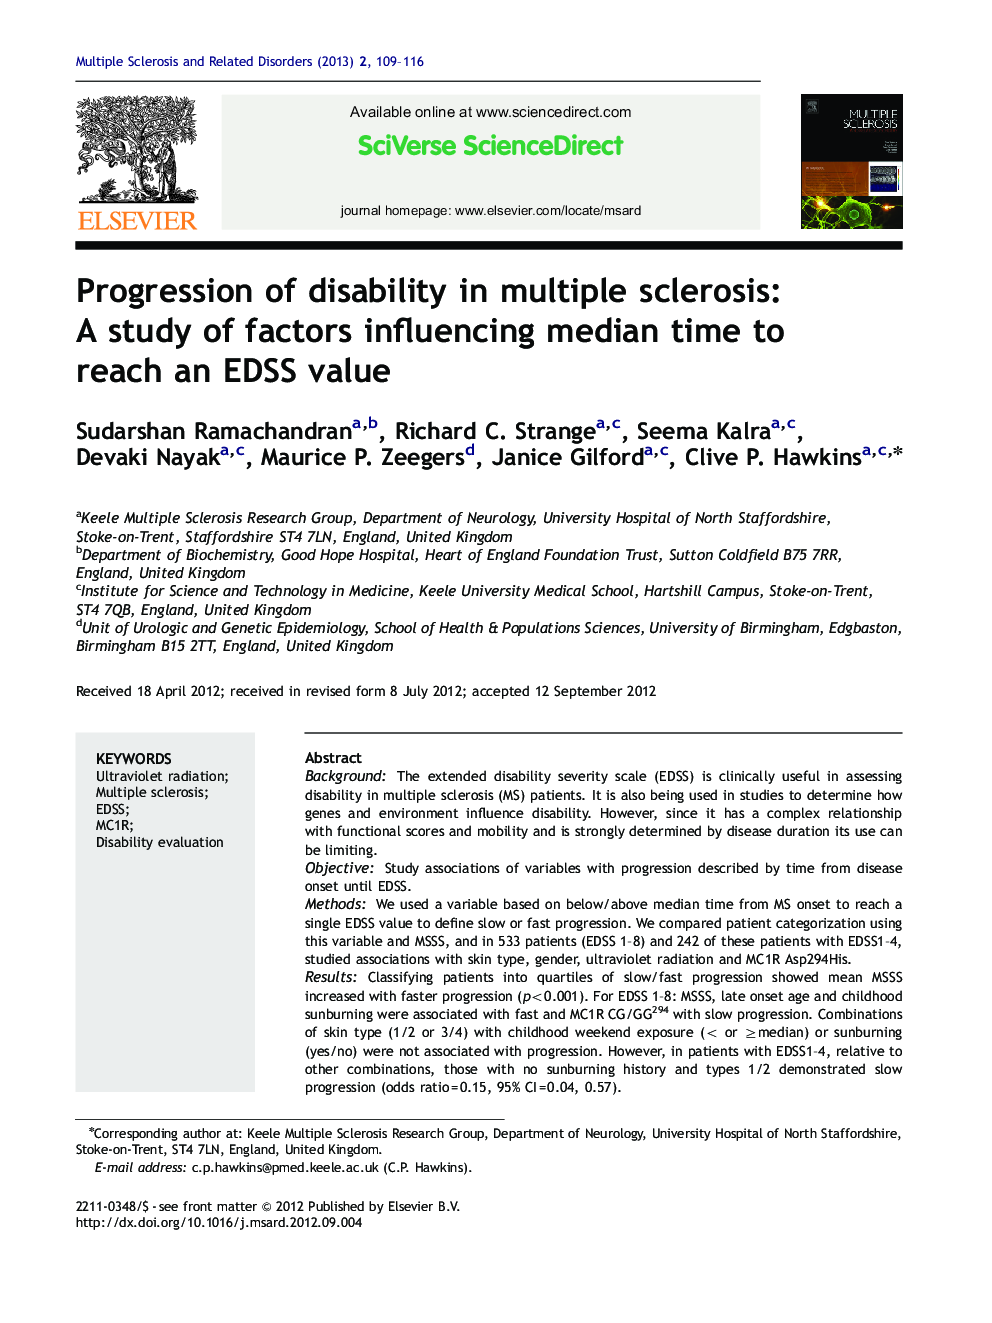 Progression of disability in multiple sclerosis: A study of factors influencing median time to reach an EDSS value